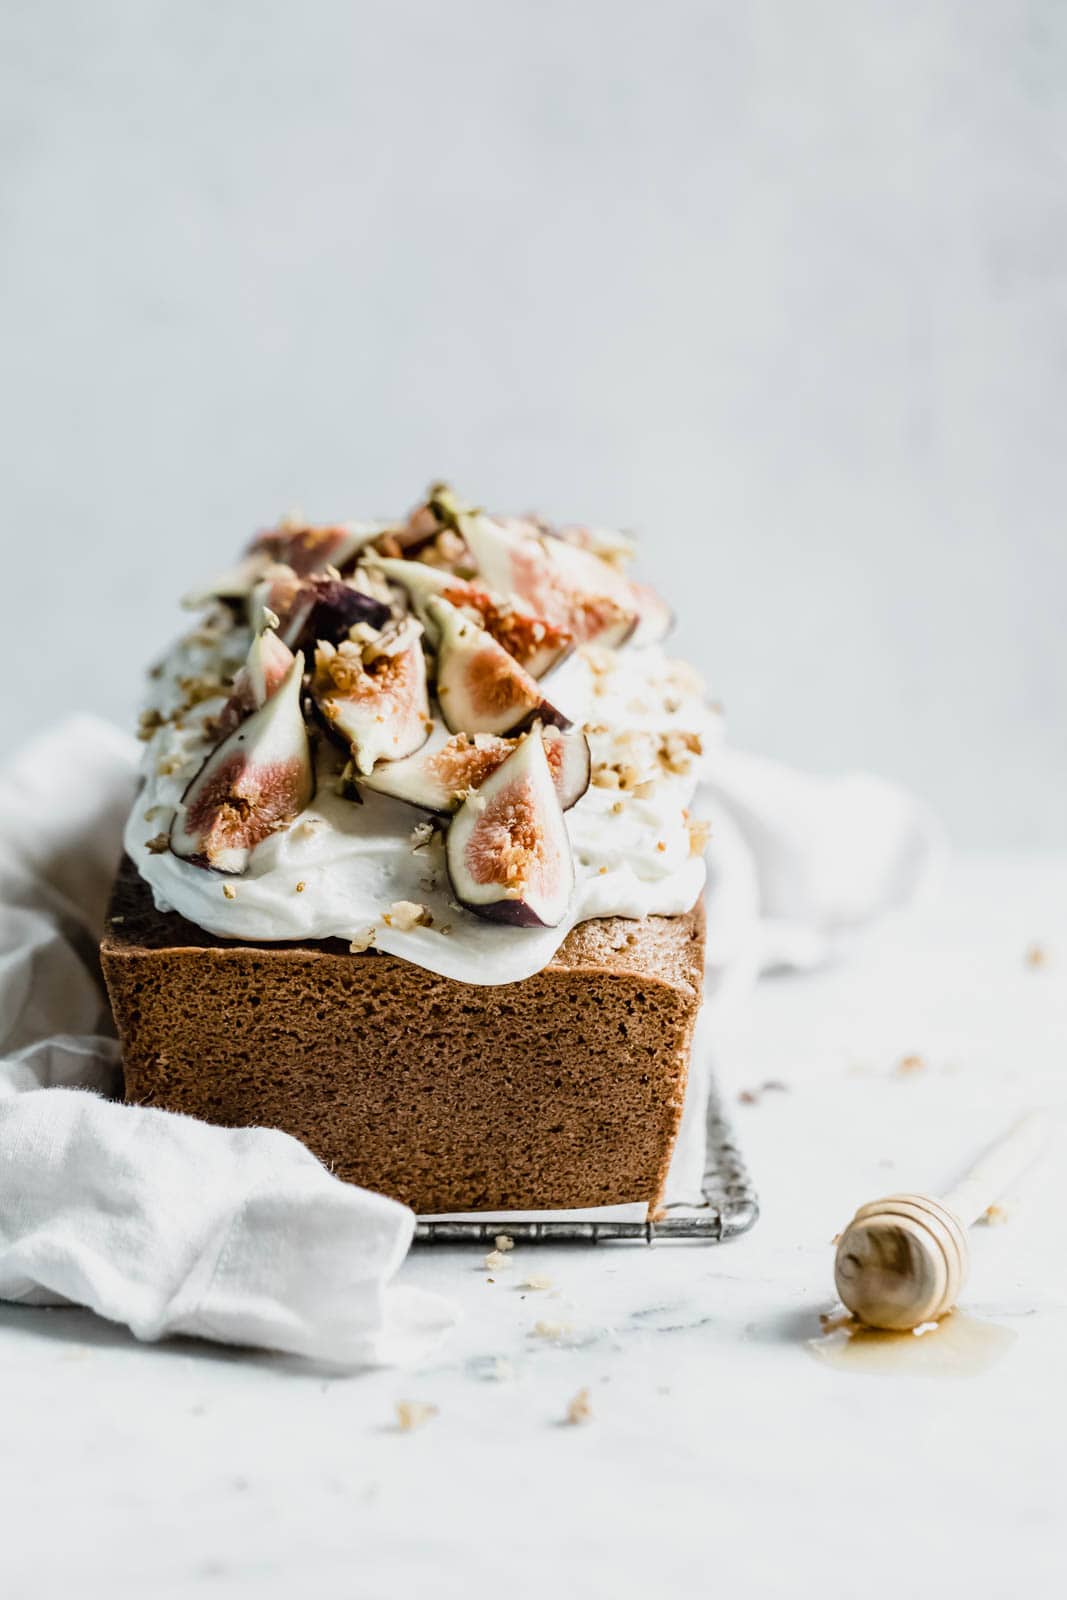 A beautifully simple one bowl honey cake spiced with cinnamon, orange, and black tea, and topped with fresh figs and a goat cheese frosting!